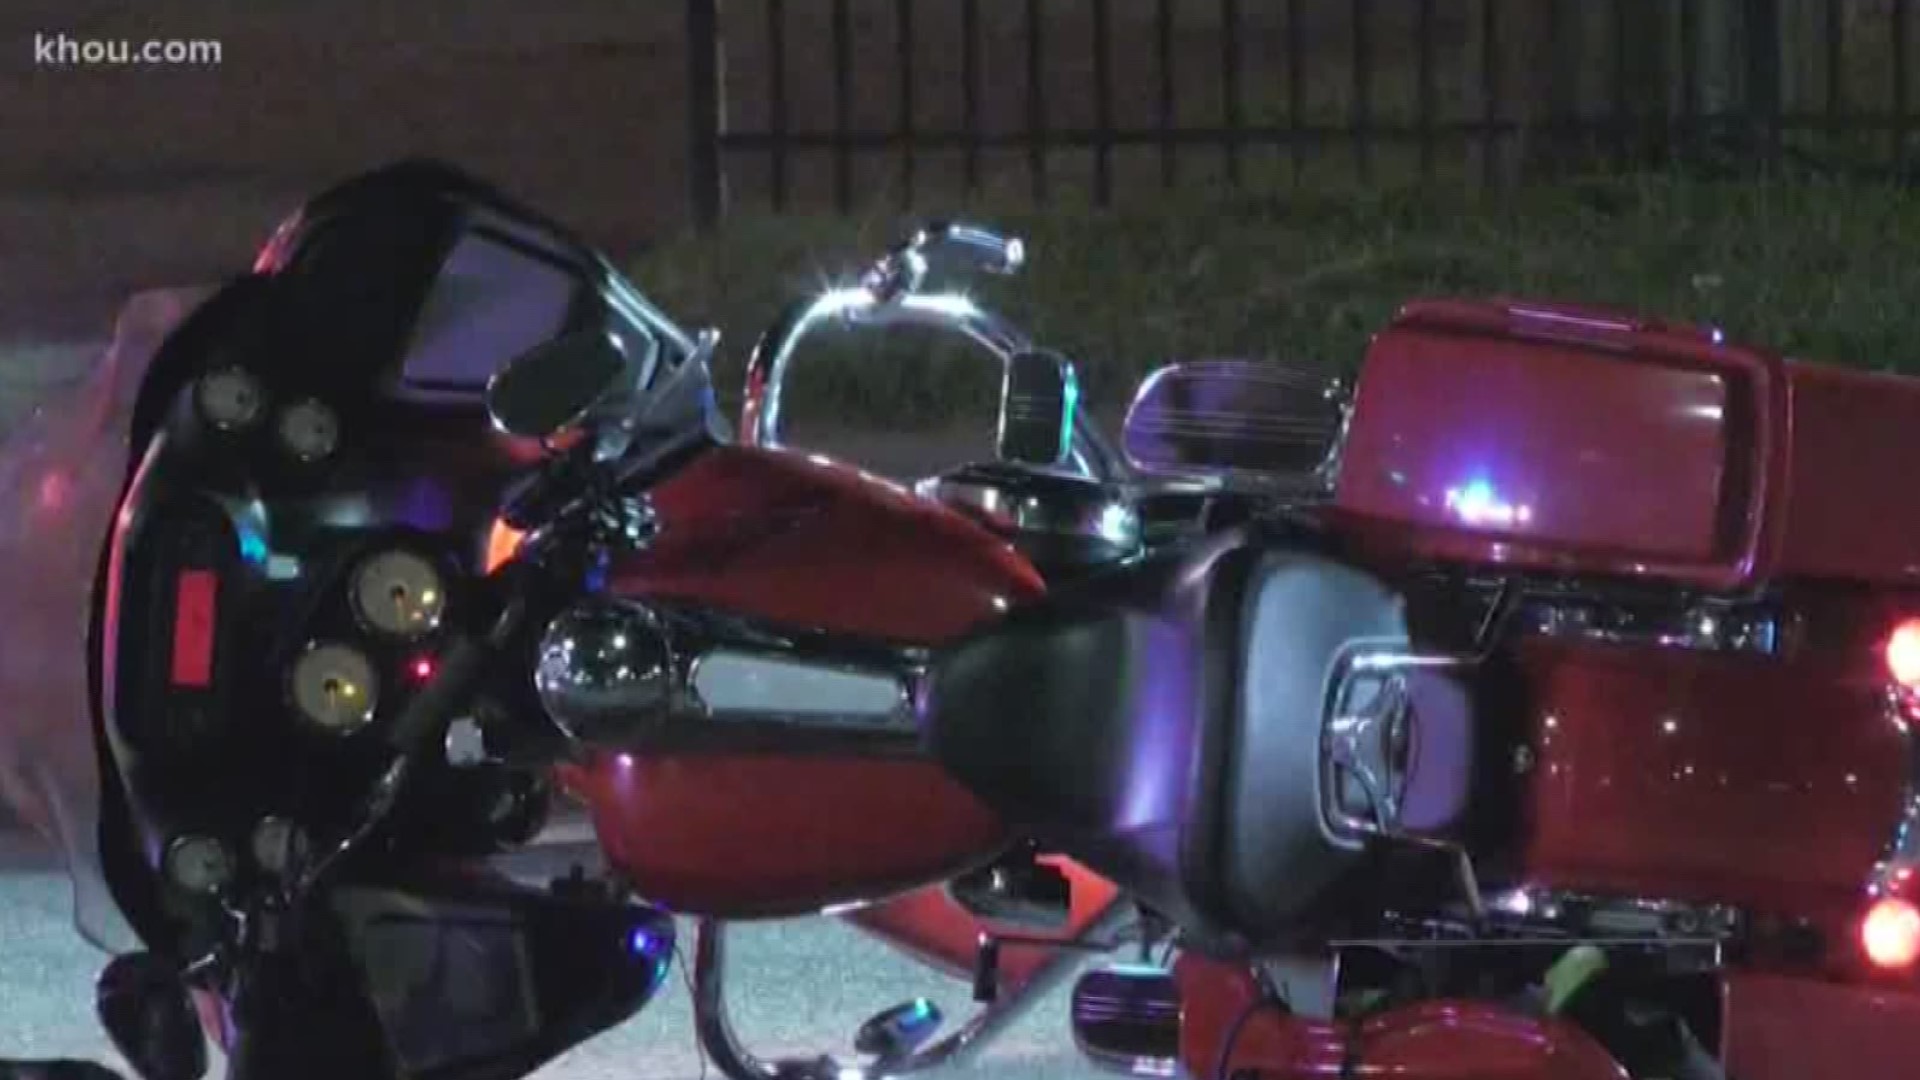 A motorcyclist is fighting for his life at the hospital after crashing his bike near the scene of Galveston’s Lone Star Rally.